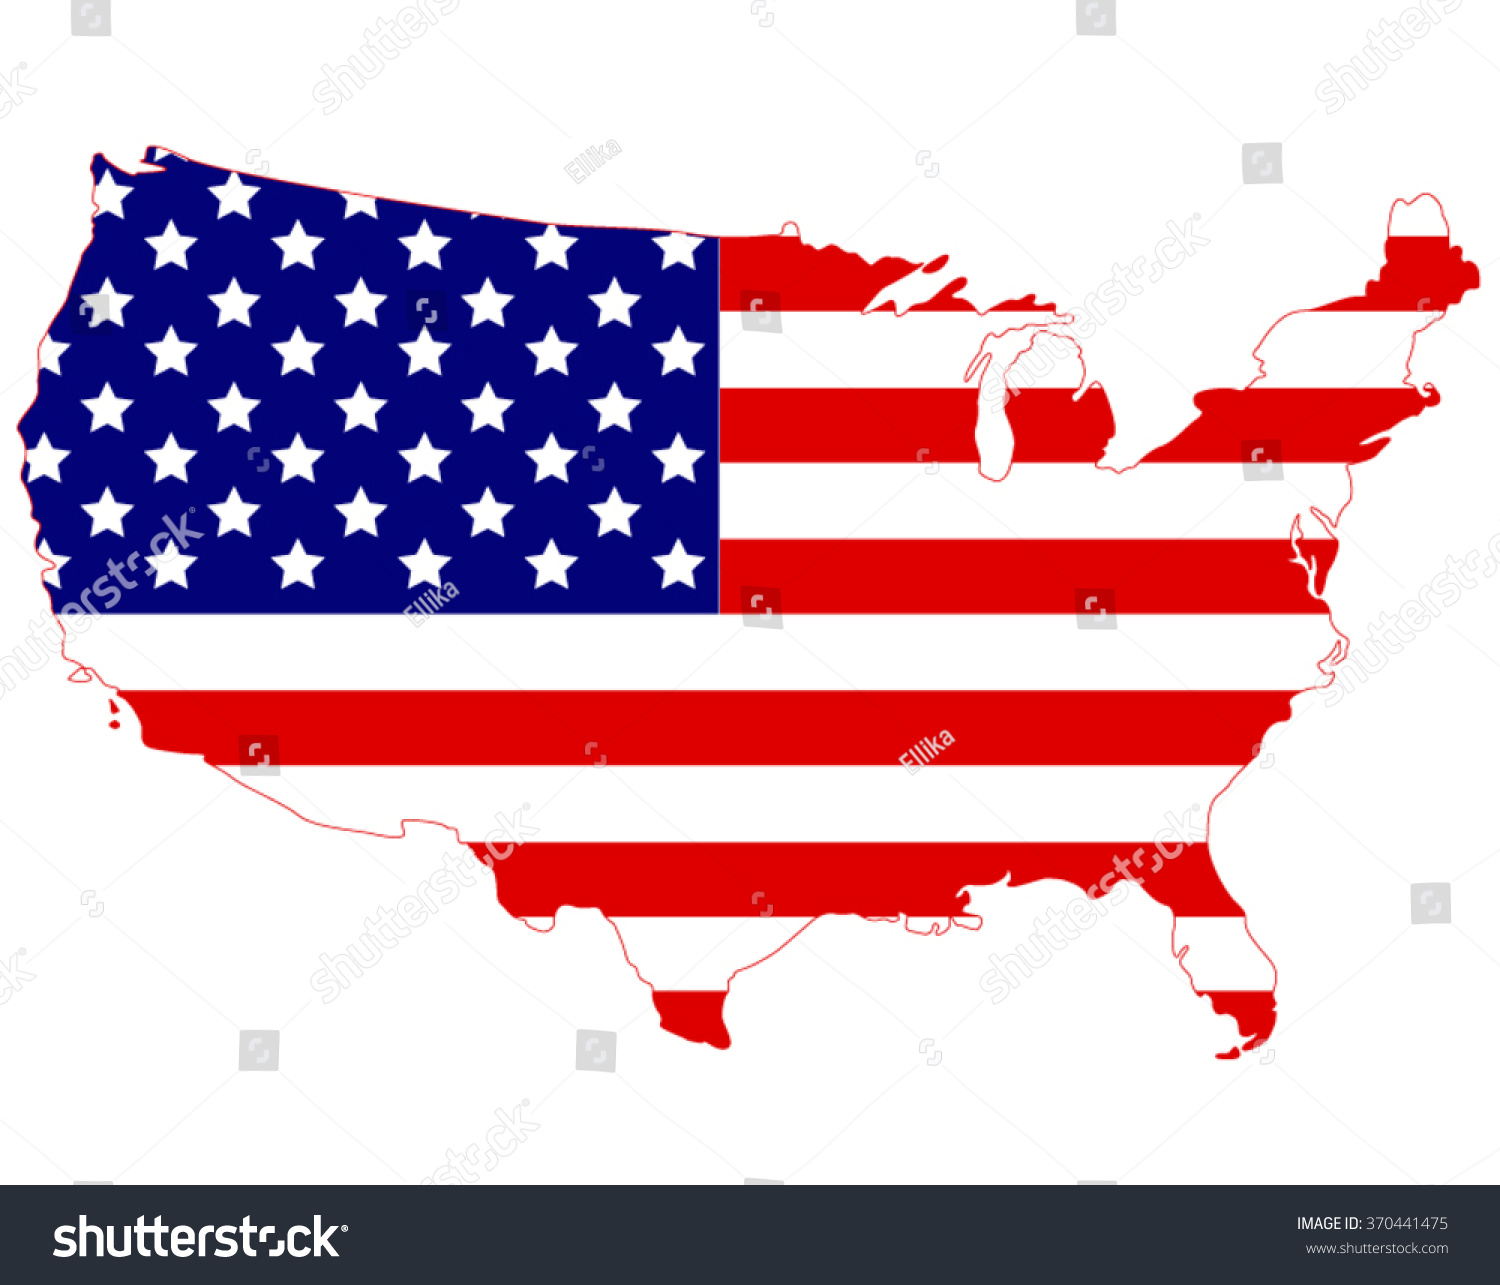 Usa Map Vector Illustration Isolated Stock Vector Royalty Free 370441475 8568